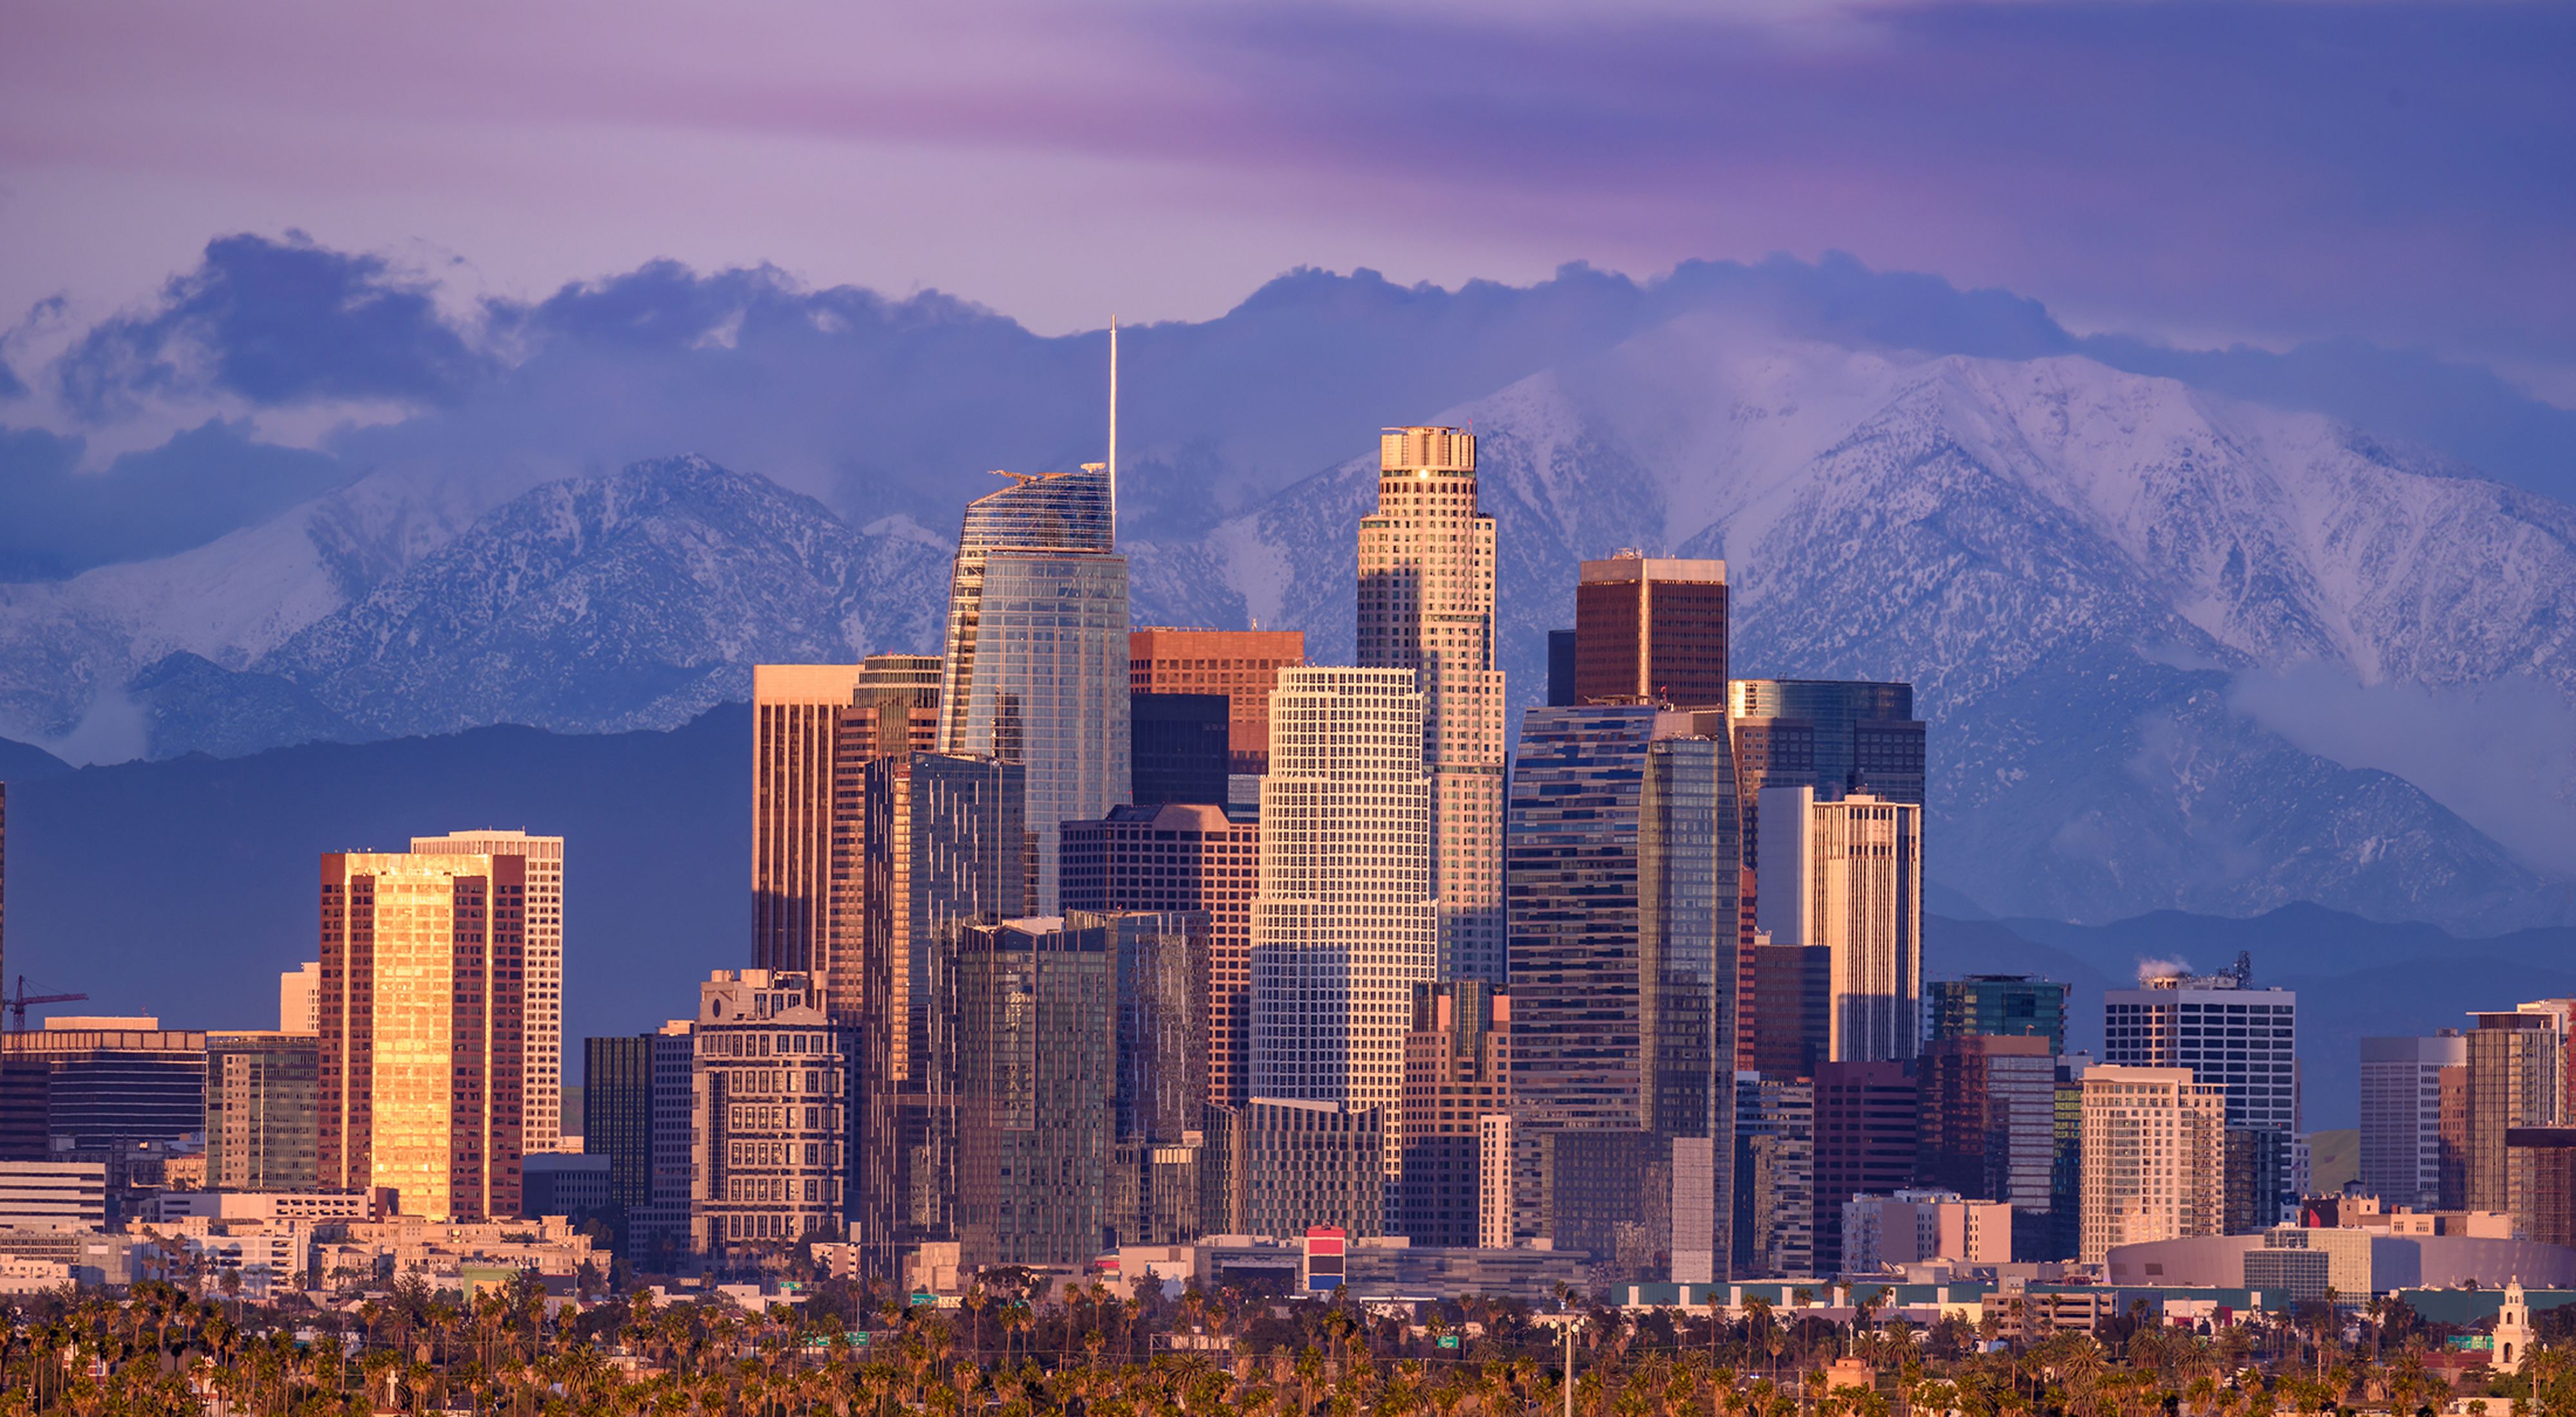 Skyline of Los Angeles against a backdrop of snowcapped mountains.